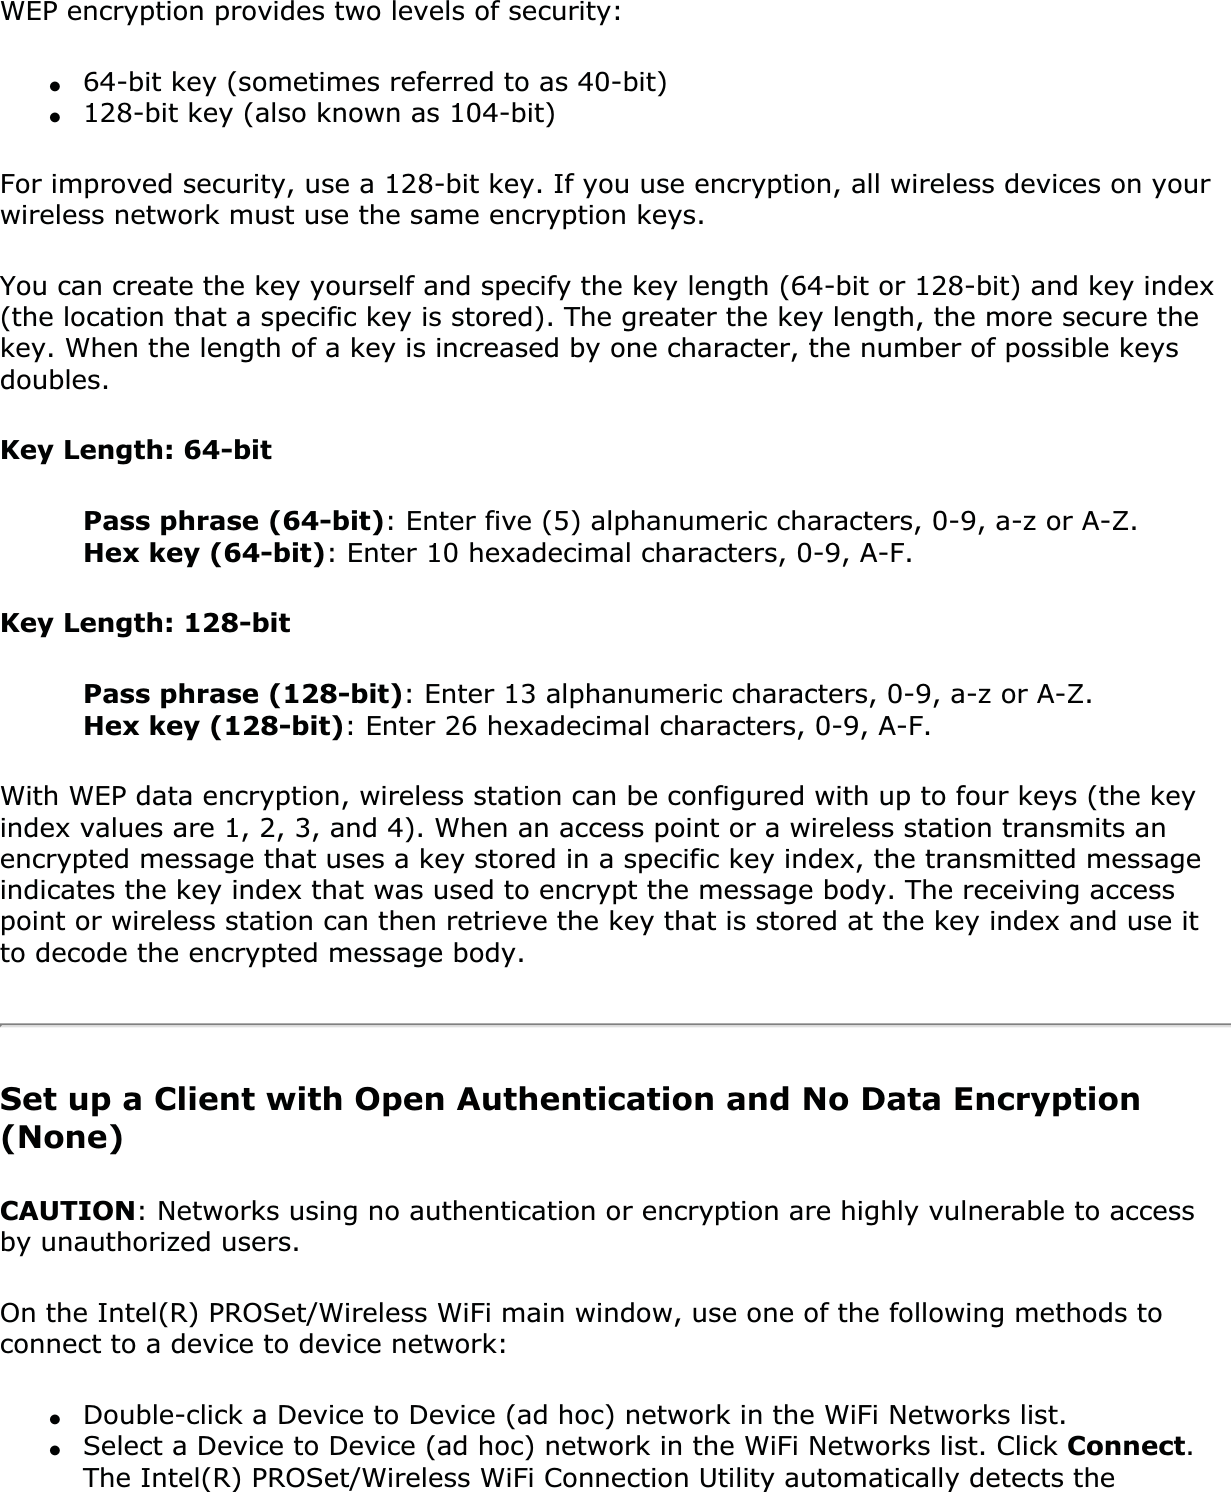 WEP encryption provides two levels of security:●64-bit key (sometimes referred to as 40-bit)●128-bit key (also known as 104-bit)For improved security, use a 128-bit key. If you use encryption, all wireless devices on your wireless network must use the same encryption keys.You can create the key yourself and specify the key length (64-bit or 128-bit) and key index (the location that a specific key is stored). The greater the key length, the more secure the key. When the length of a key is increased by one character, the number of possible keys doubles.Key Length: 64-bitPass phrase (64-bit): Enter five (5) alphanumeric characters, 0-9, a-z or A-Z. Hex key (64-bit): Enter 10 hexadecimal characters, 0-9, A-F. Key Length: 128-bitPass phrase (128-bit): Enter 13 alphanumeric characters, 0-9, a-z or A-Z. Hex key (128-bit): Enter 26 hexadecimal characters, 0-9, A-F.With WEP data encryption, wireless station can be configured with up to four keys (the key index values are 1, 2, 3, and 4). When an access point or a wireless station transmits an encrypted message that uses a key stored in a specific key index, the transmitted message indicates the key index that was used to encrypt the message body. The receiving access point or wireless station can then retrieve the key that is stored at the key index and use it to decode the encrypted message body.Set up a Client with Open Authentication and No Data Encryption (None)CAUTION: Networks using no authentication or encryption are highly vulnerable to access by unauthorized users. On the Intel(R) PROSet/Wireless WiFi main window, use one of the following methods to connect to a device to device network:●Double-click a Device to Device (ad hoc) network in the WiFi Networks list. ●Select a Device to Device (ad hoc) network in the WiFi Networks list. Click Connect.The Intel(R) PROSet/Wireless WiFi Connection Utility automatically detects the 